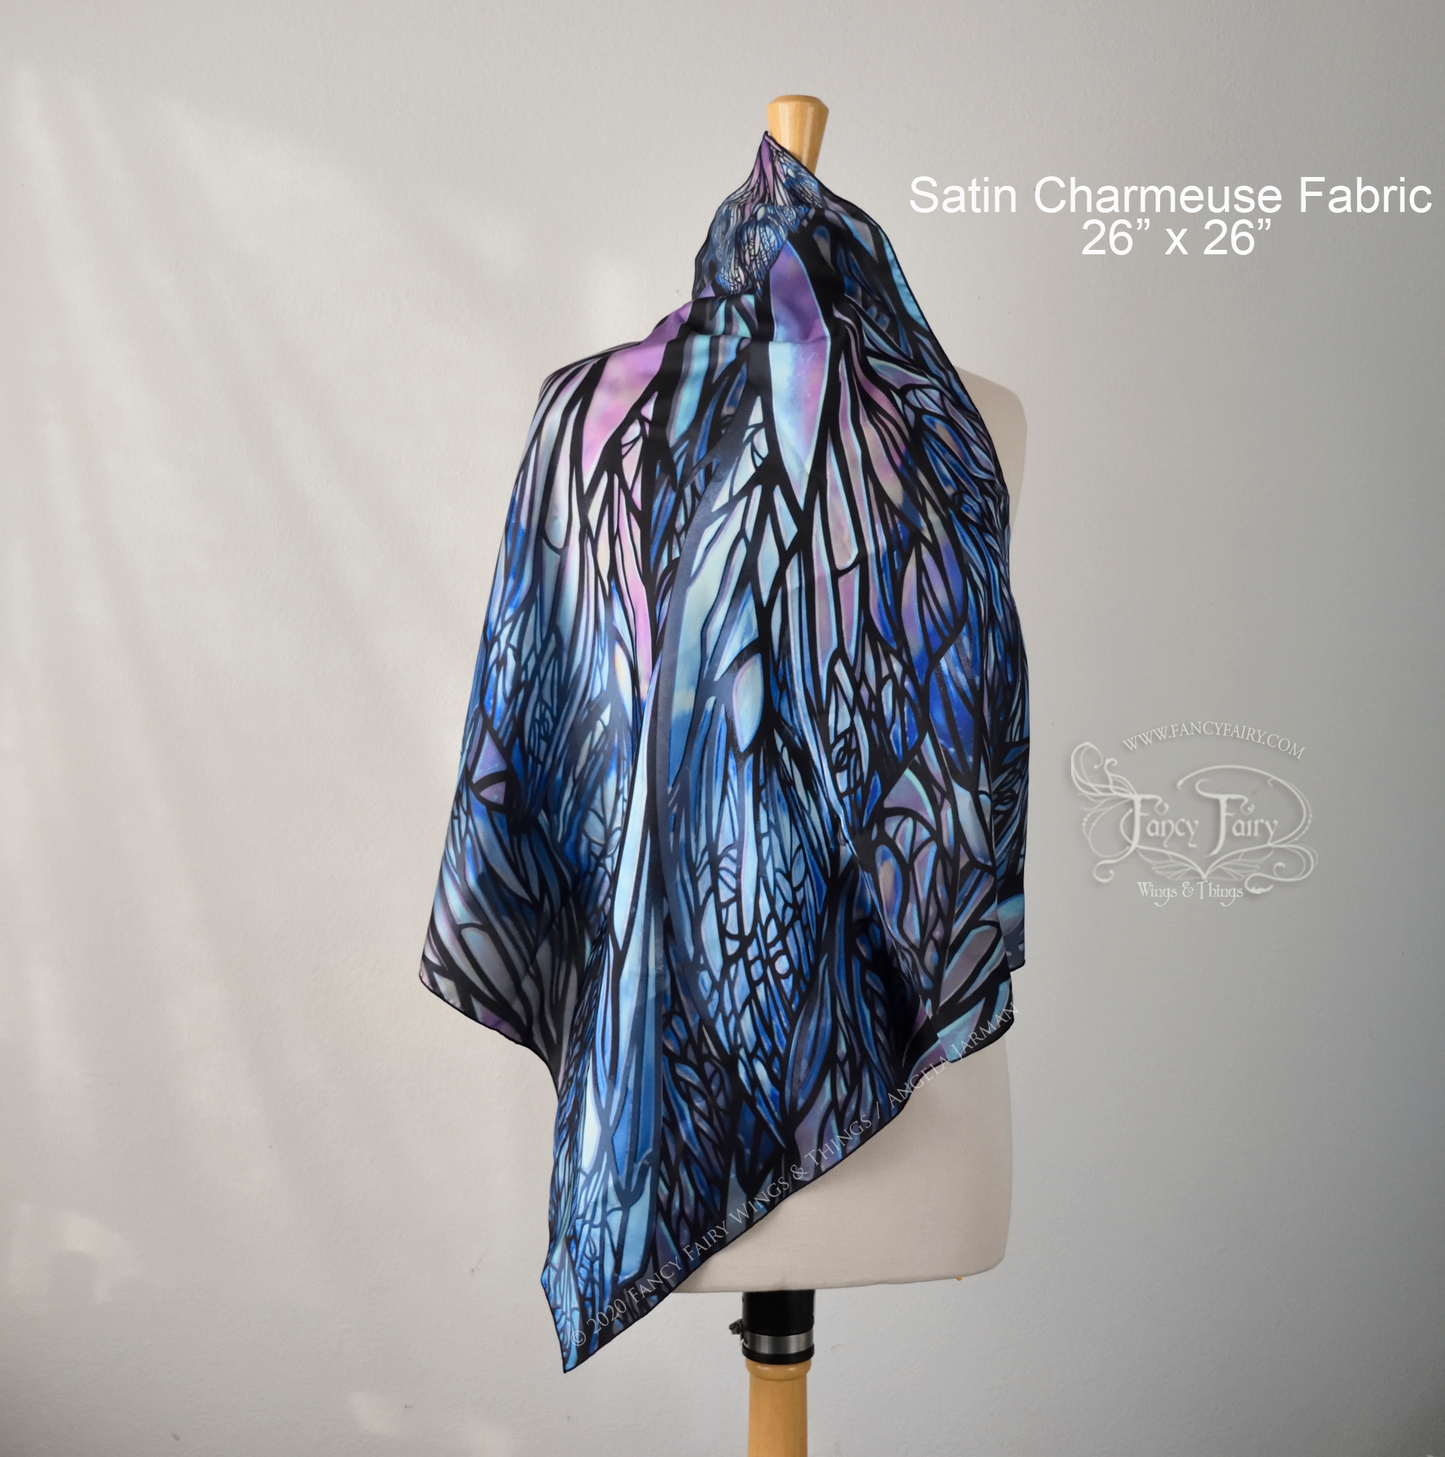 'Colette' Pixish Fairy Wing Square Scarf / Fabric, Made to Order